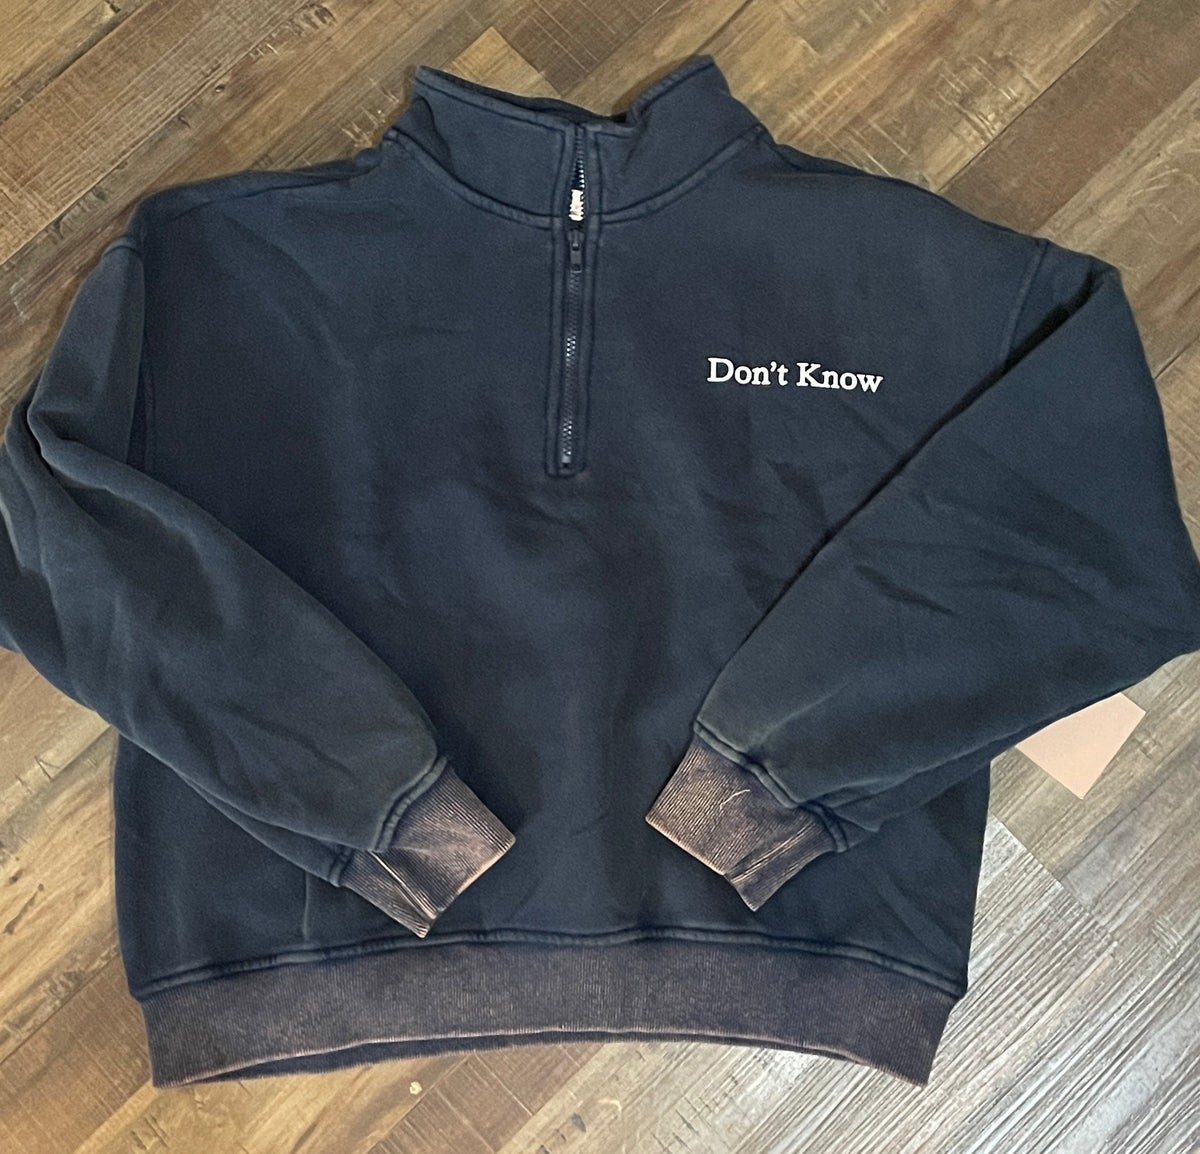 The Wavy Navy Don’t Know, Don’t Care sweatshirt